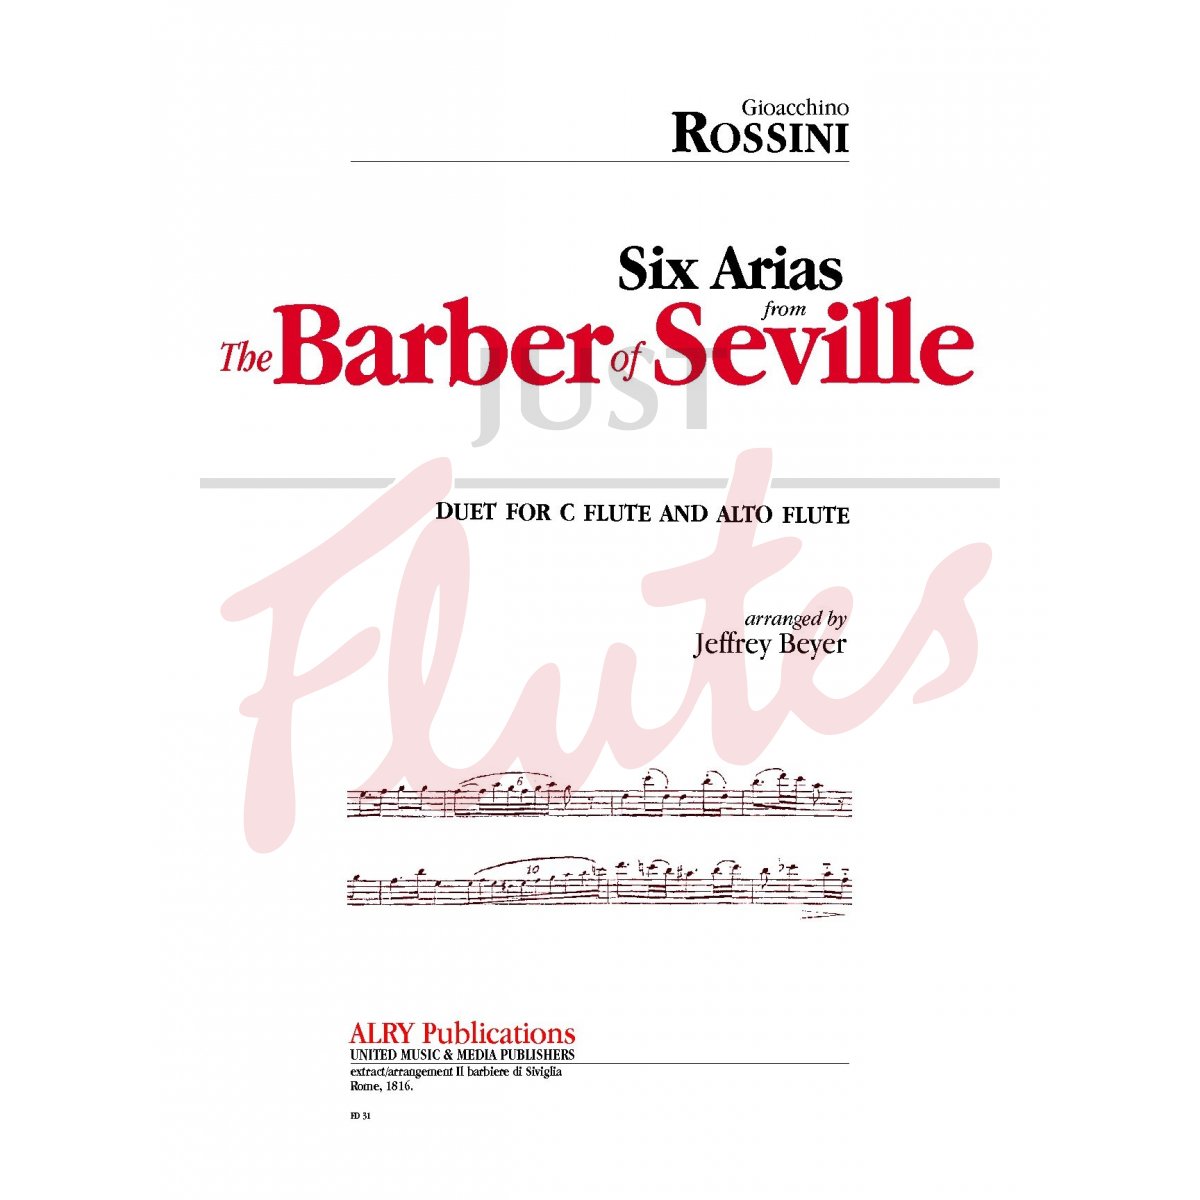 Six Arias from The Barber of Seville for Flute and Alto Flute